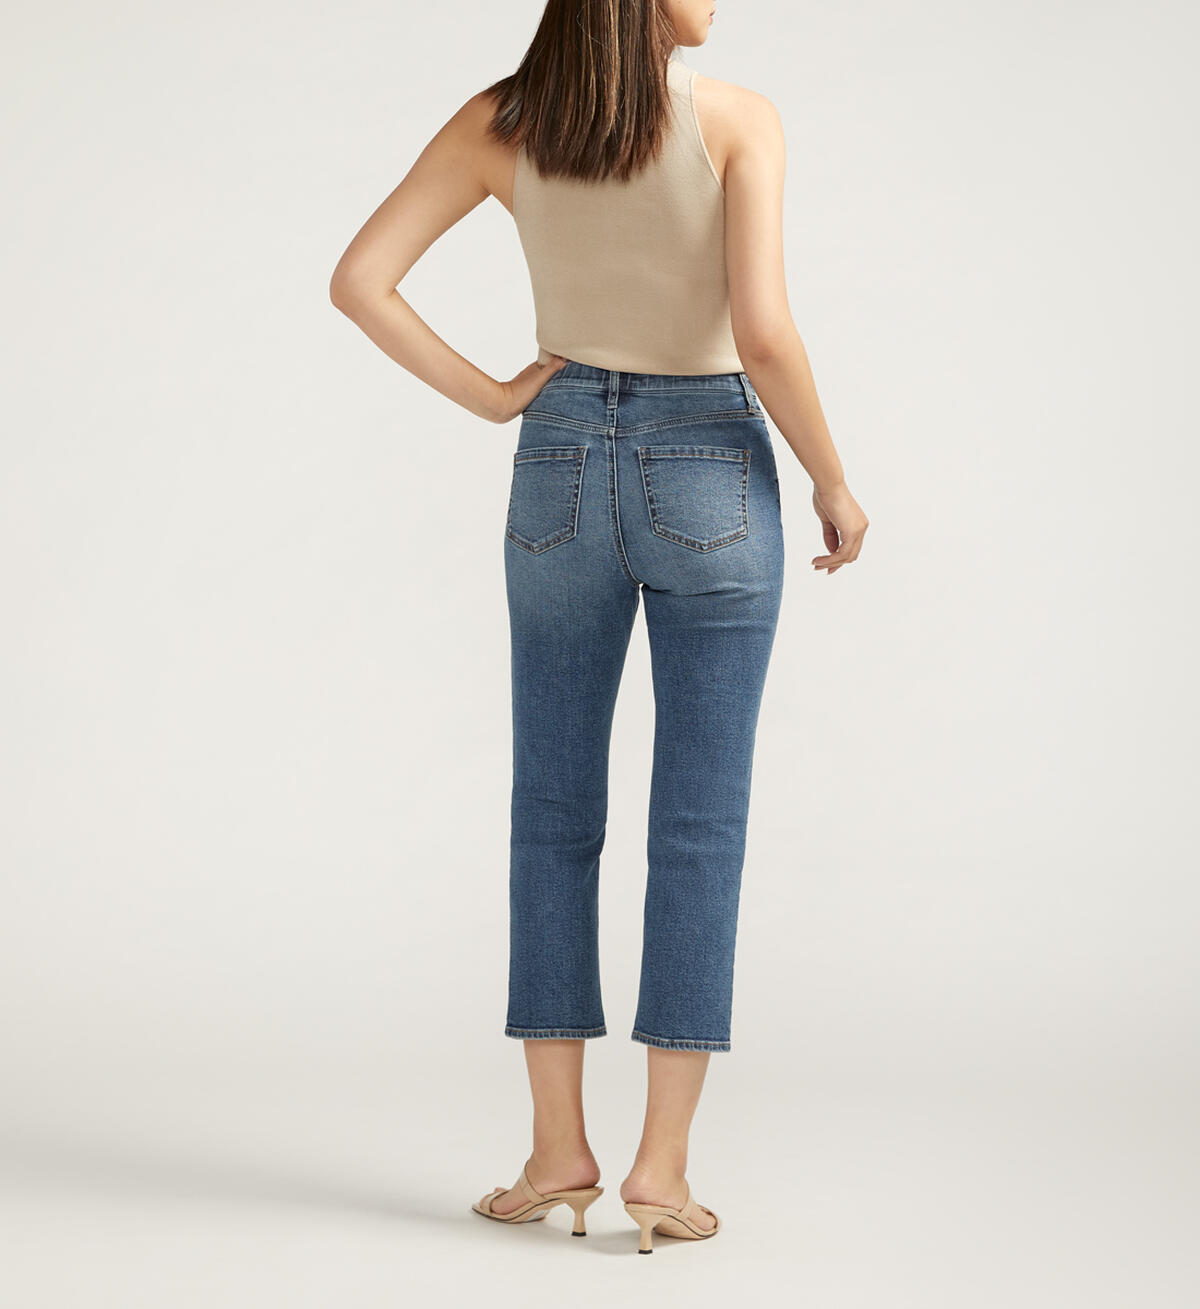 Valentina High Rise Straight Leg Cropped Jeans, , hi-res image number 1